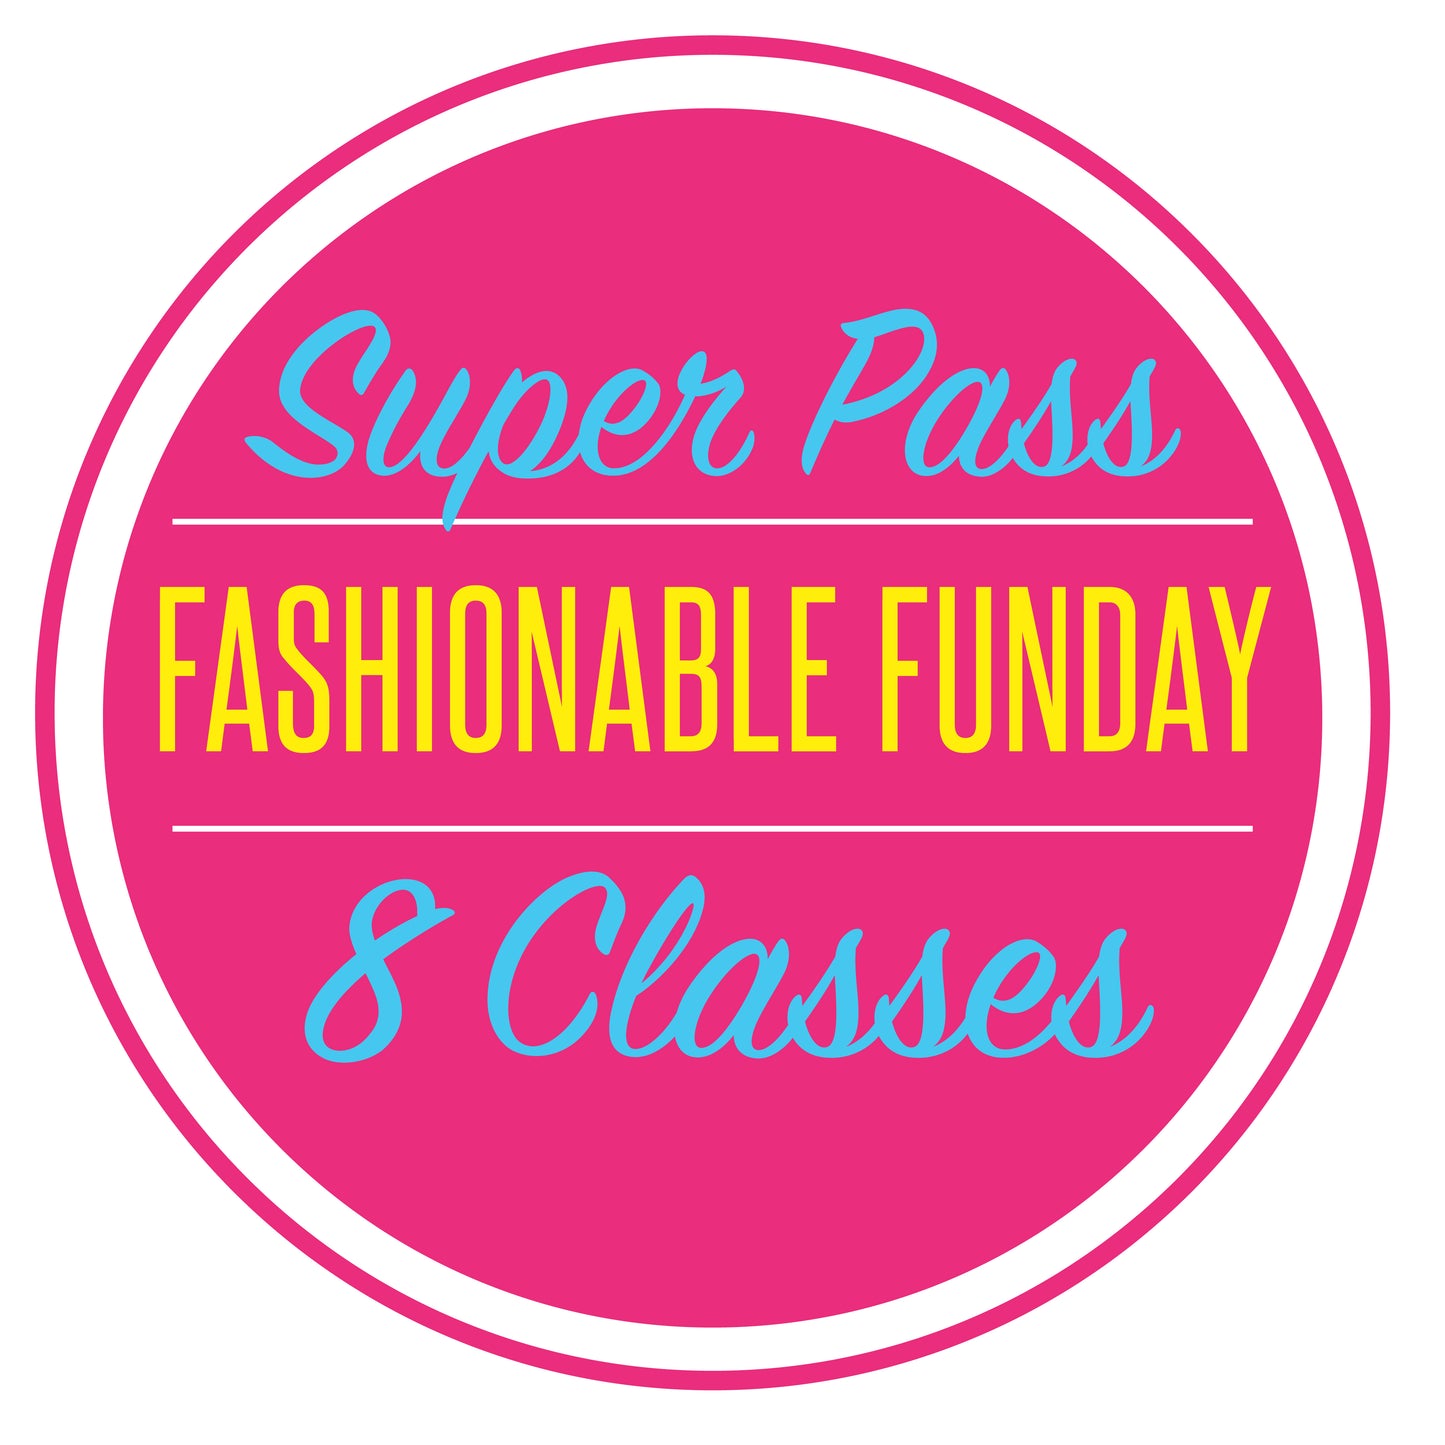 Fashionable Funday Super Pass - 8 classes